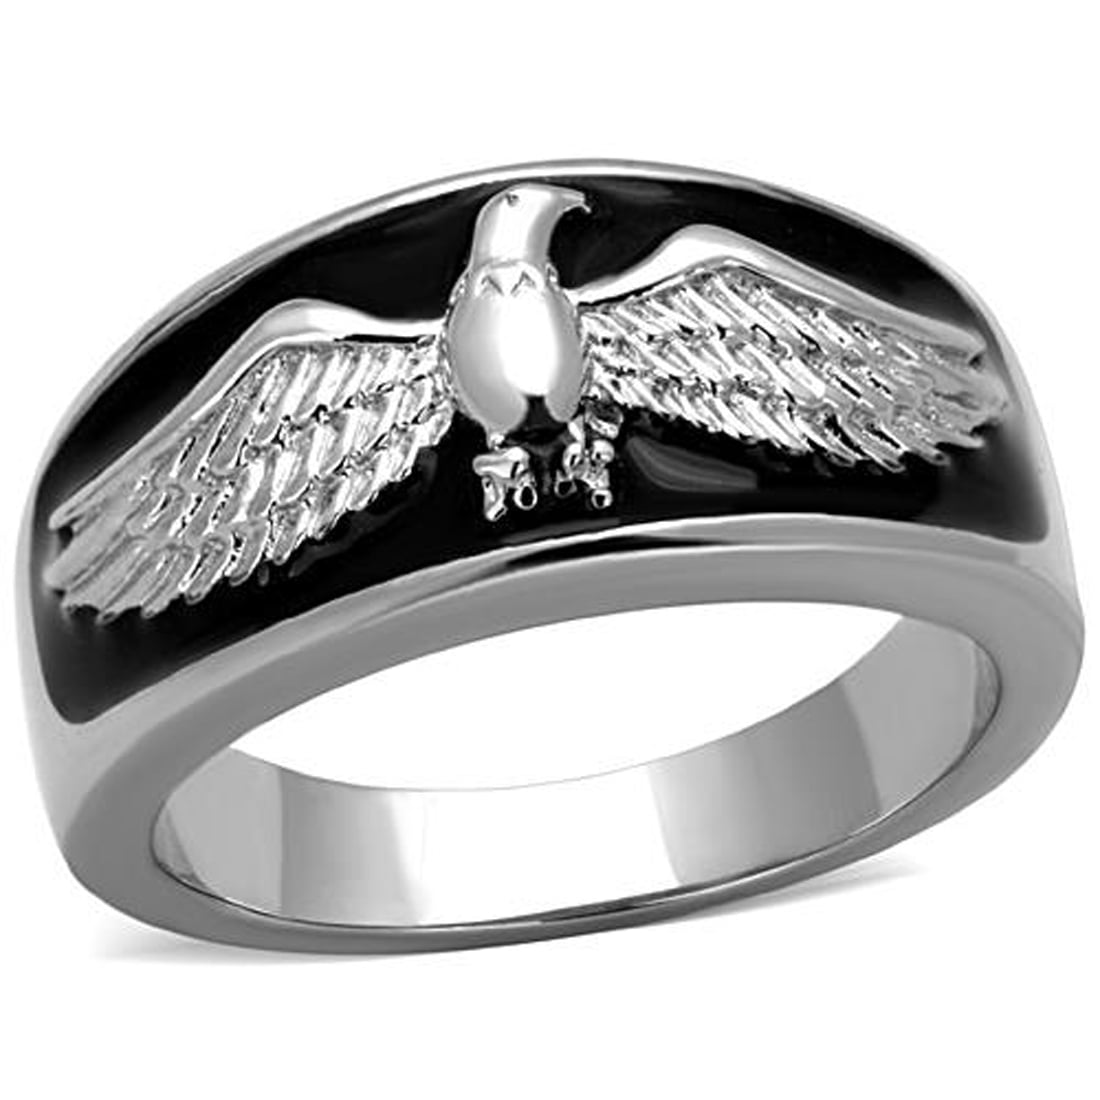 Stainless Steel Polished w/Sterling Silver Rhodium-plated Eagle Ring Size 11 Length Width 18.86 